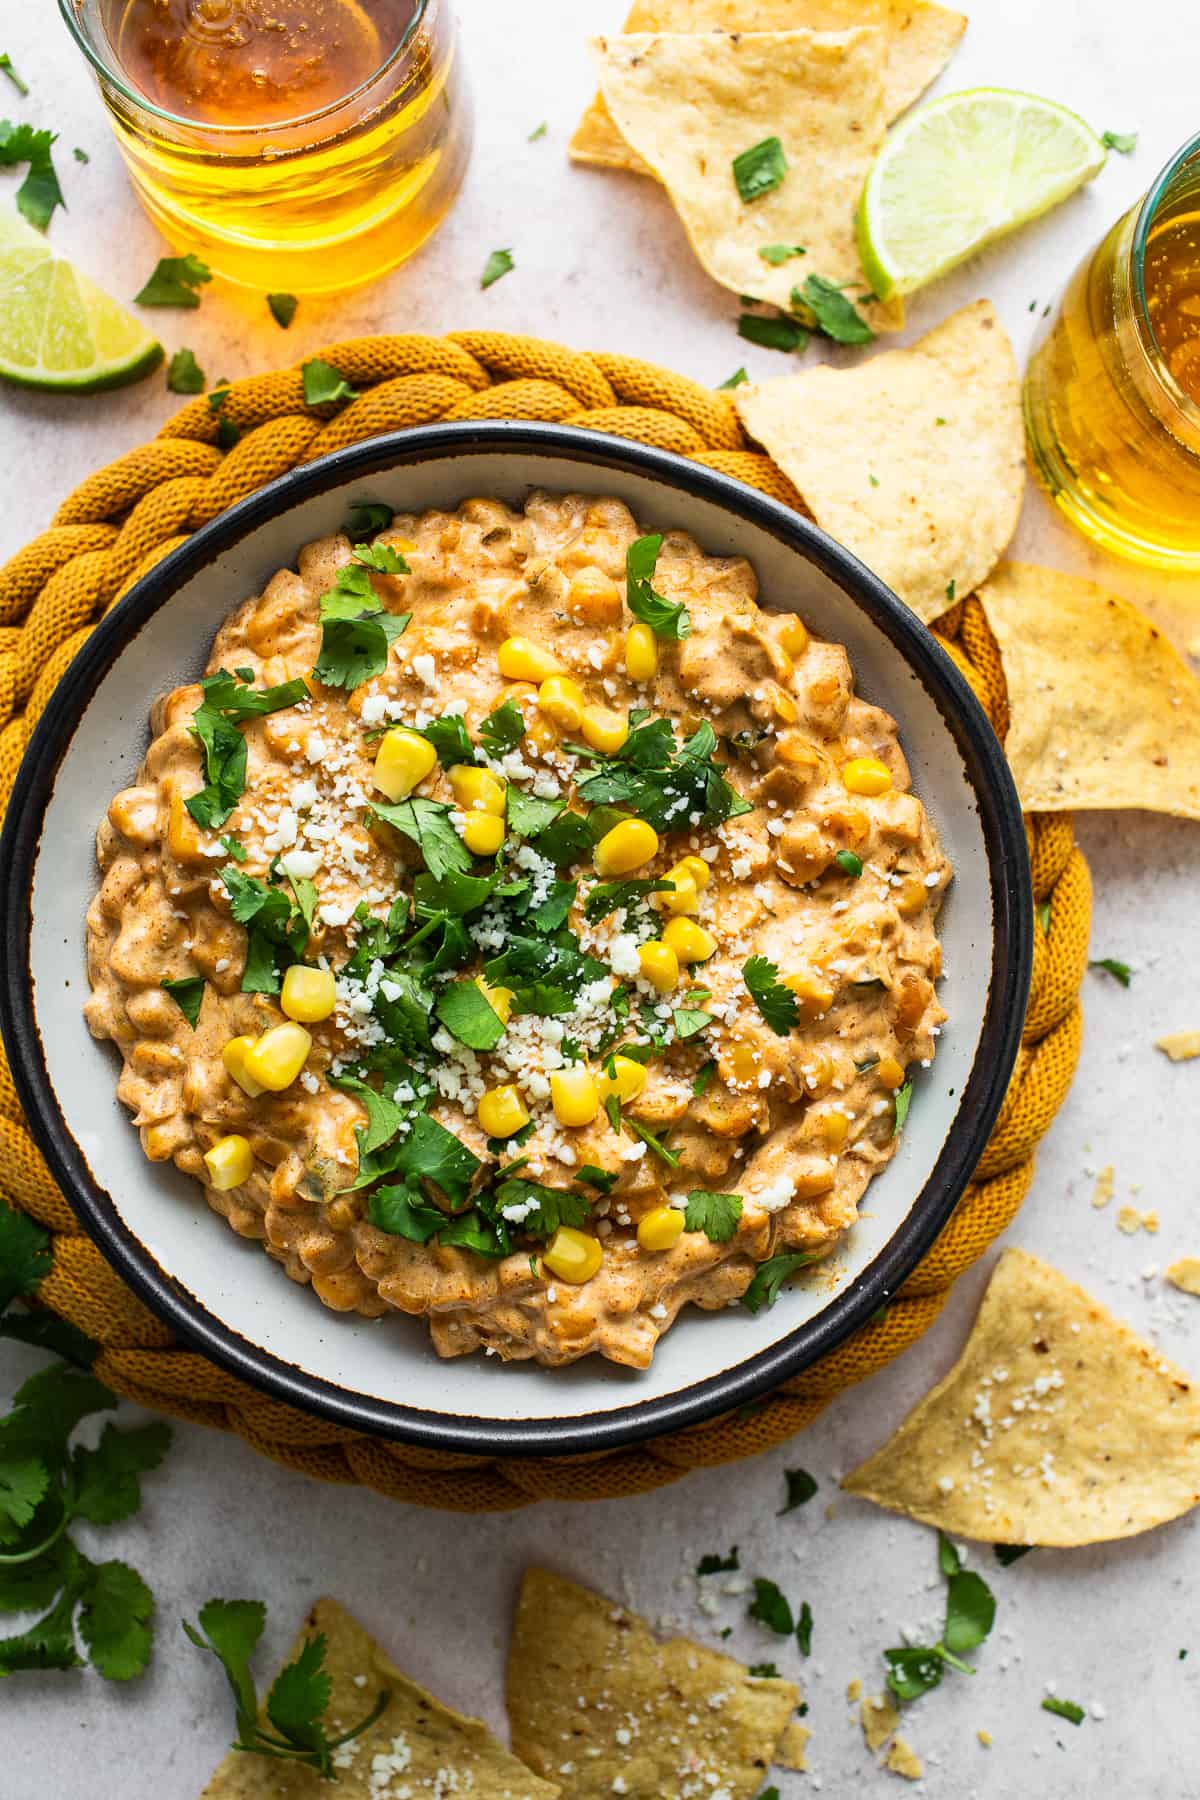 A bowl of Mexican corn dip garnished with cilantro and cotija cheese.